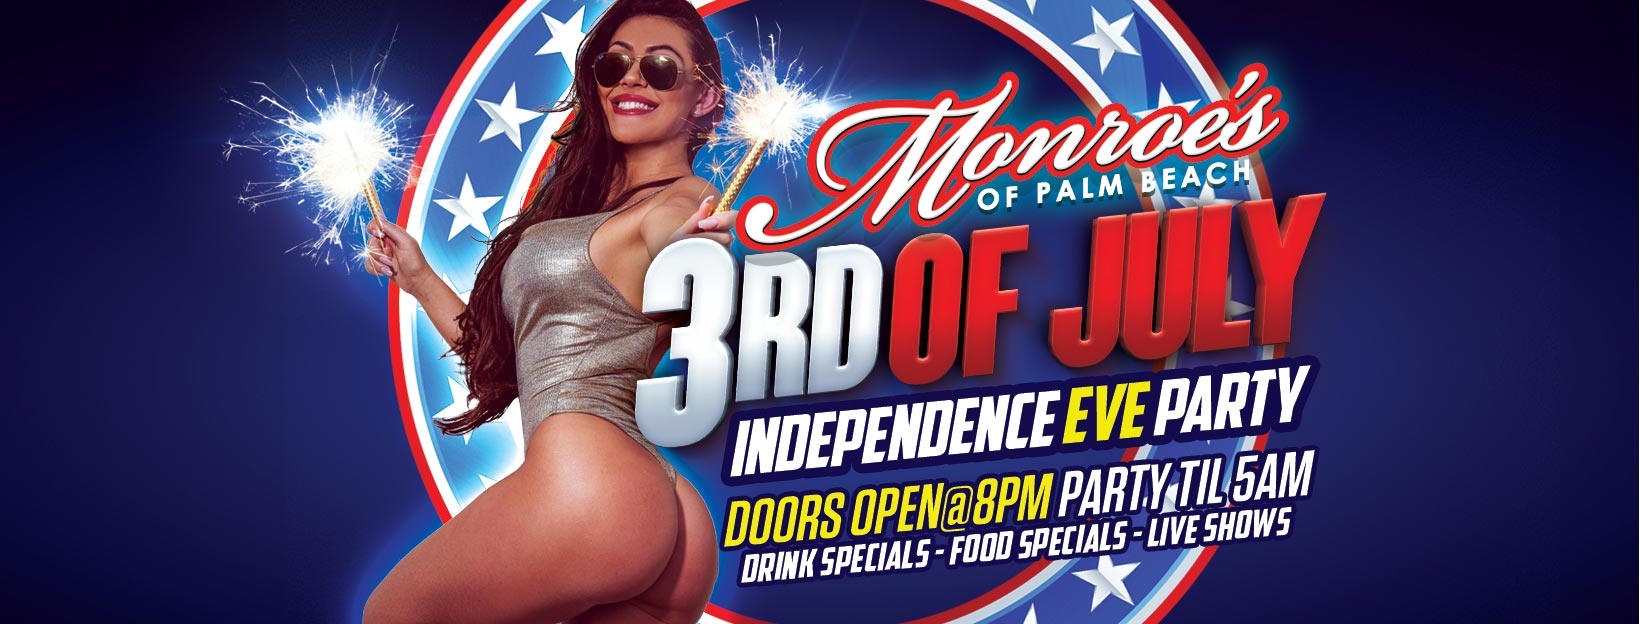 Monroe's Palm Beach 3rd of July Independence EVE Pre-Party